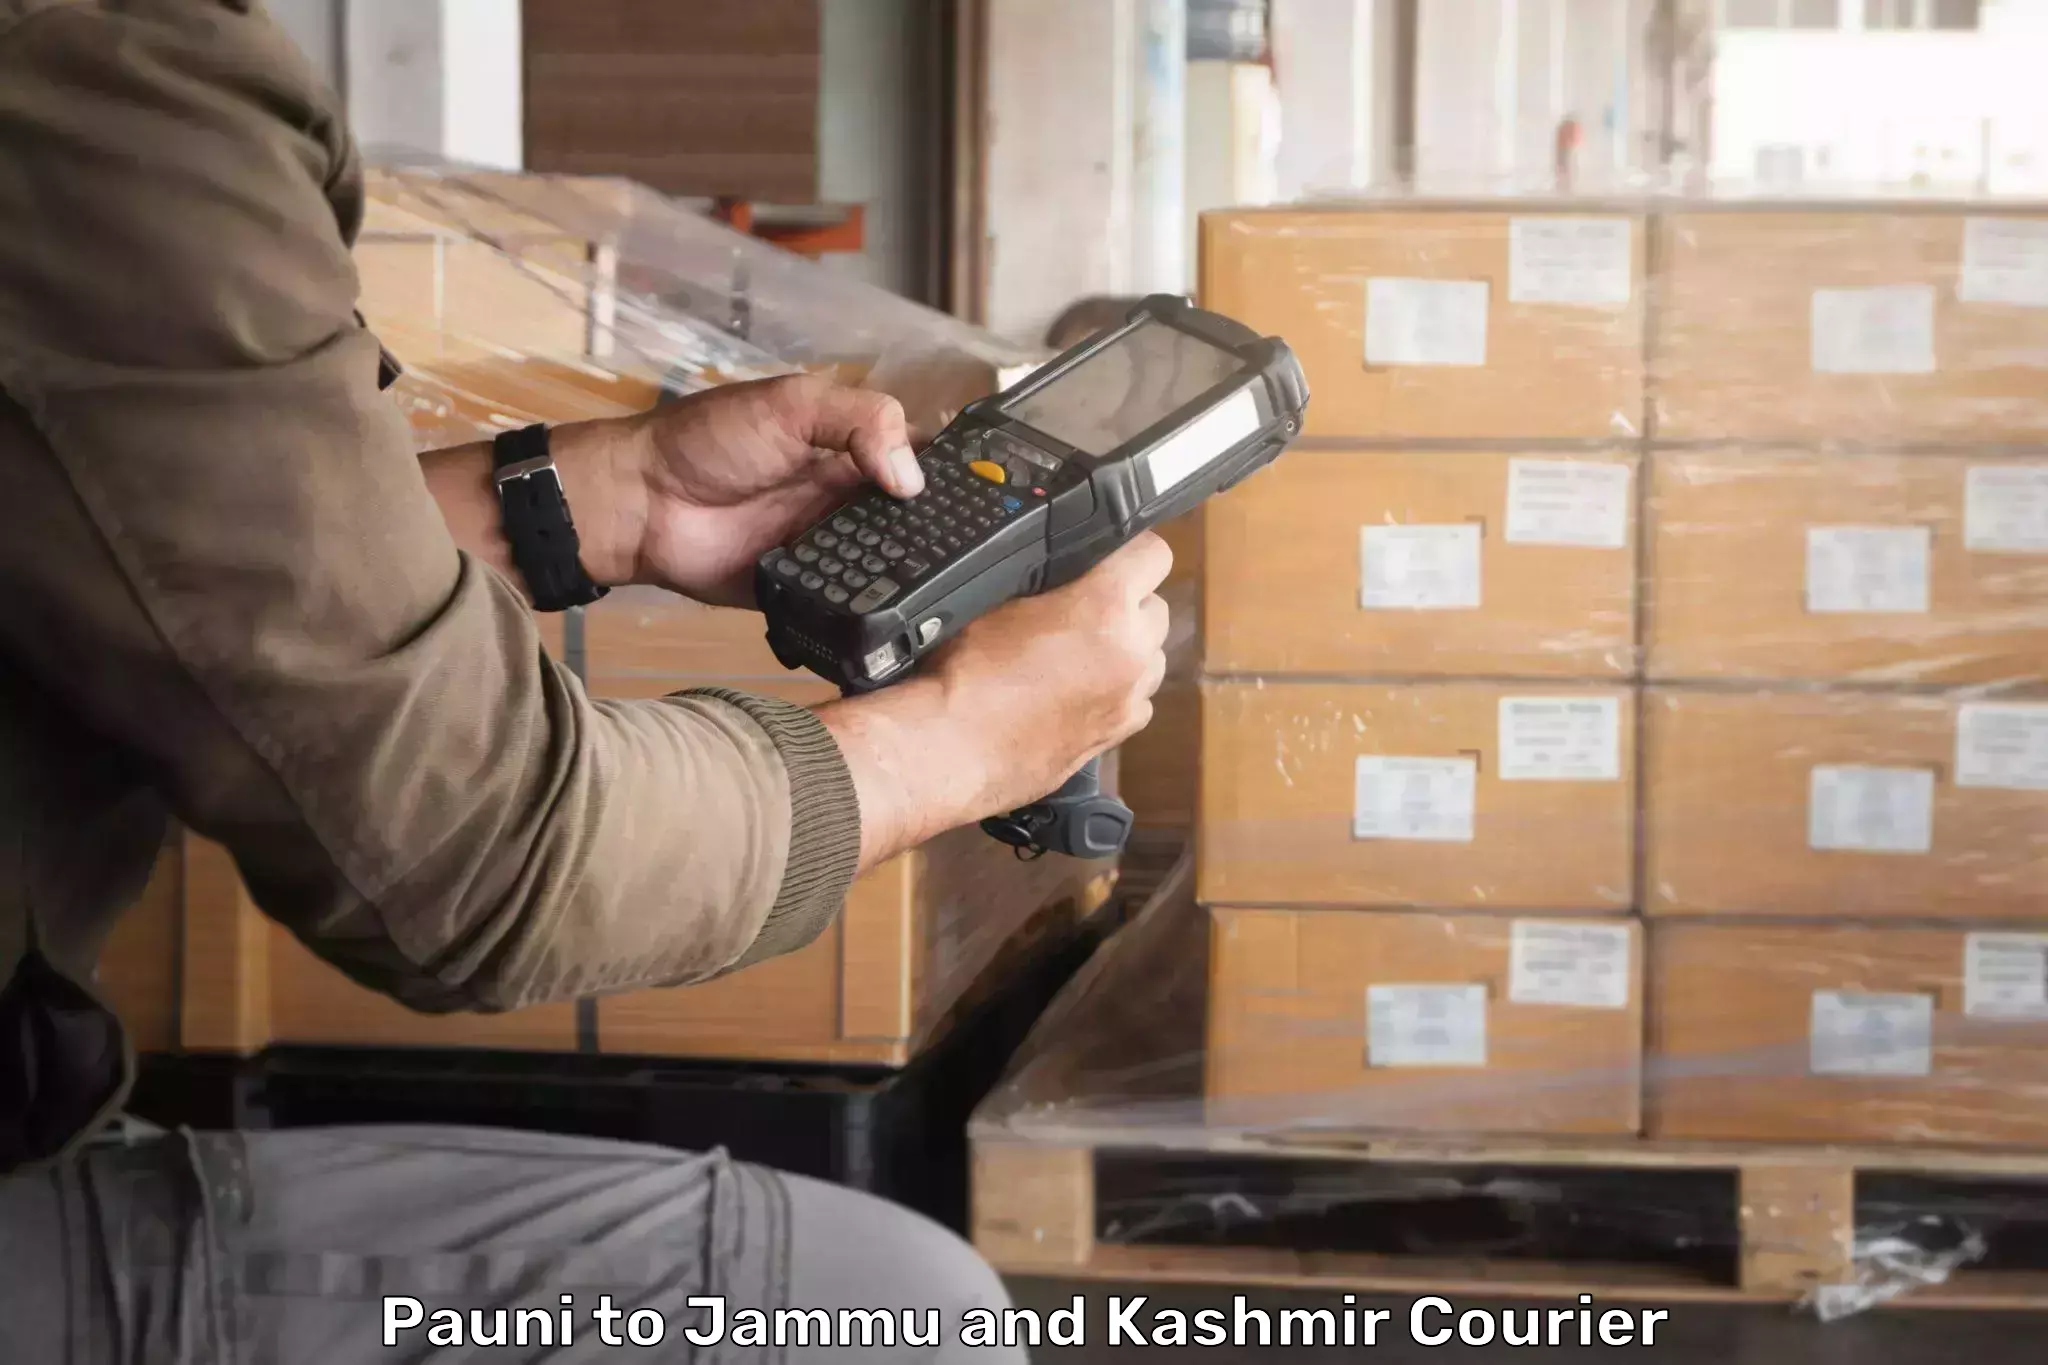 Large package courier Pauni to Jammu and Kashmir